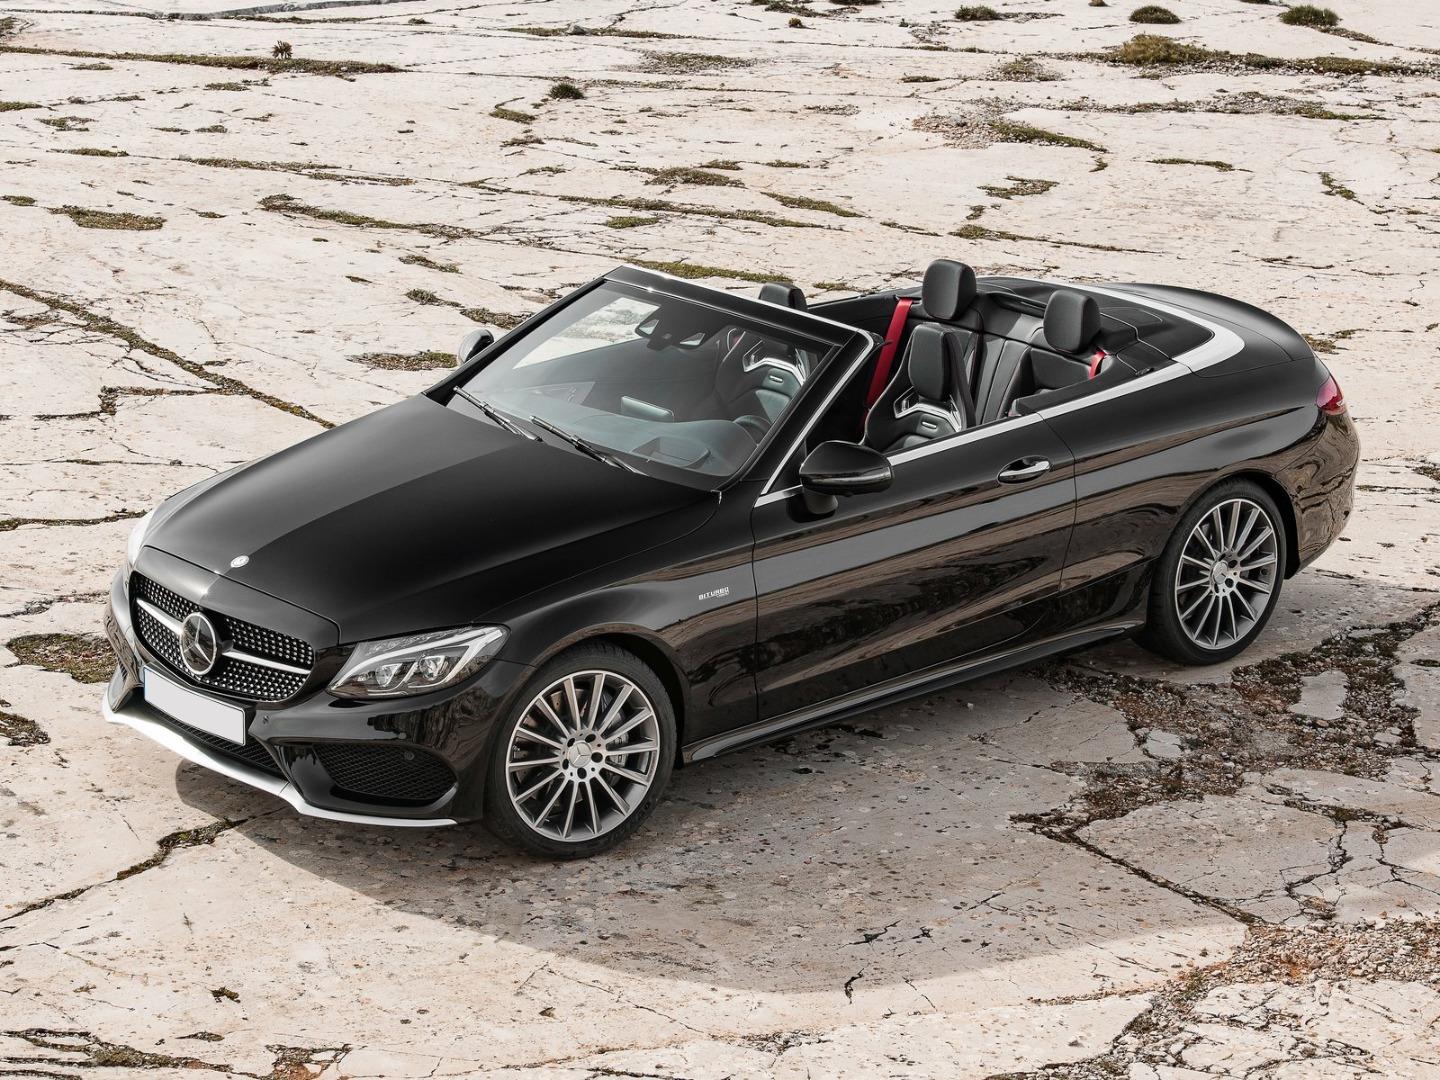 what is the mercedes-amg c-class top speed?